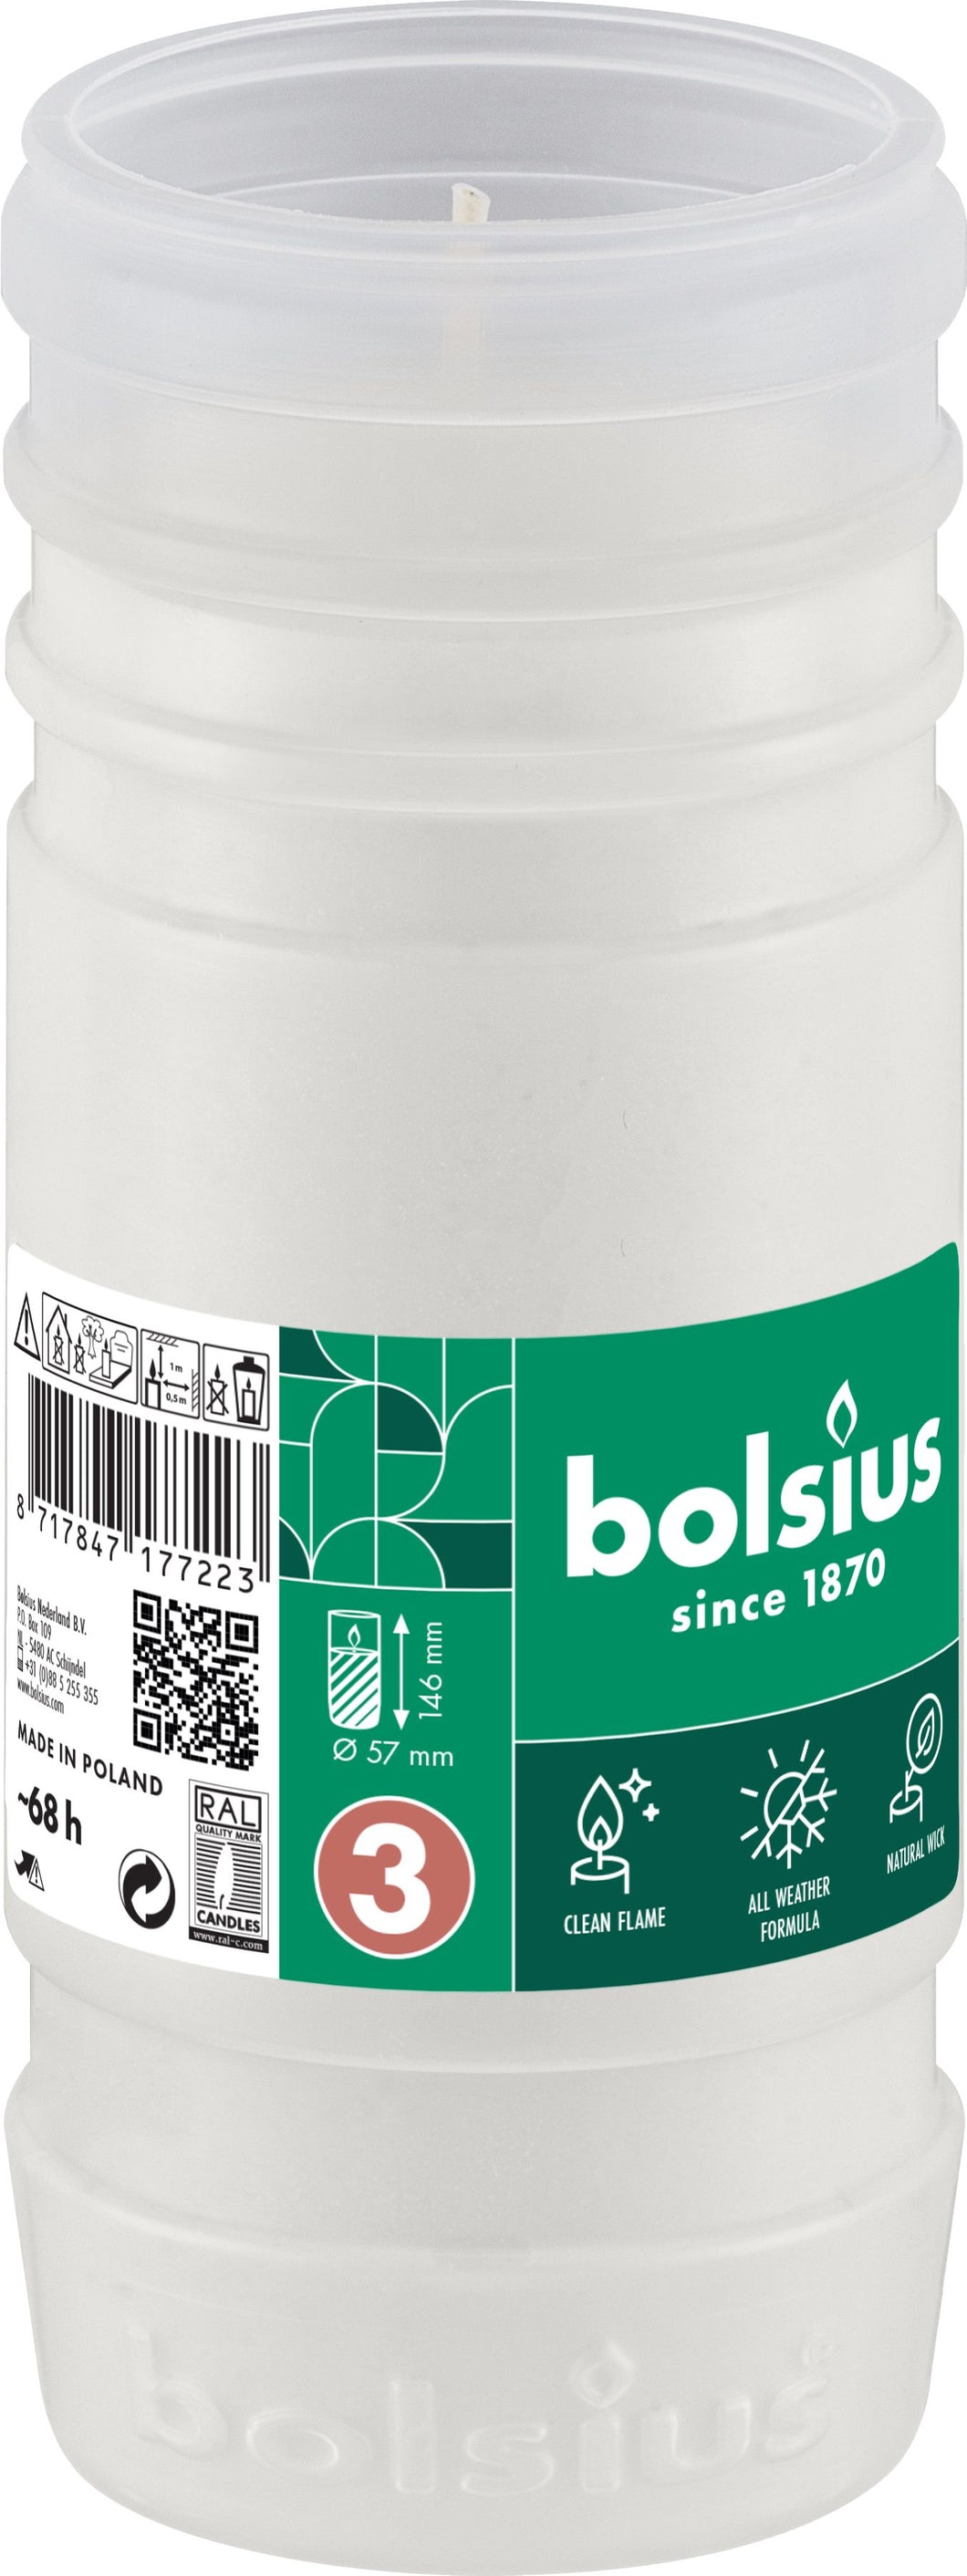 Bolsius Refill RP3 Candle, All Weather Formula - 146/57mm